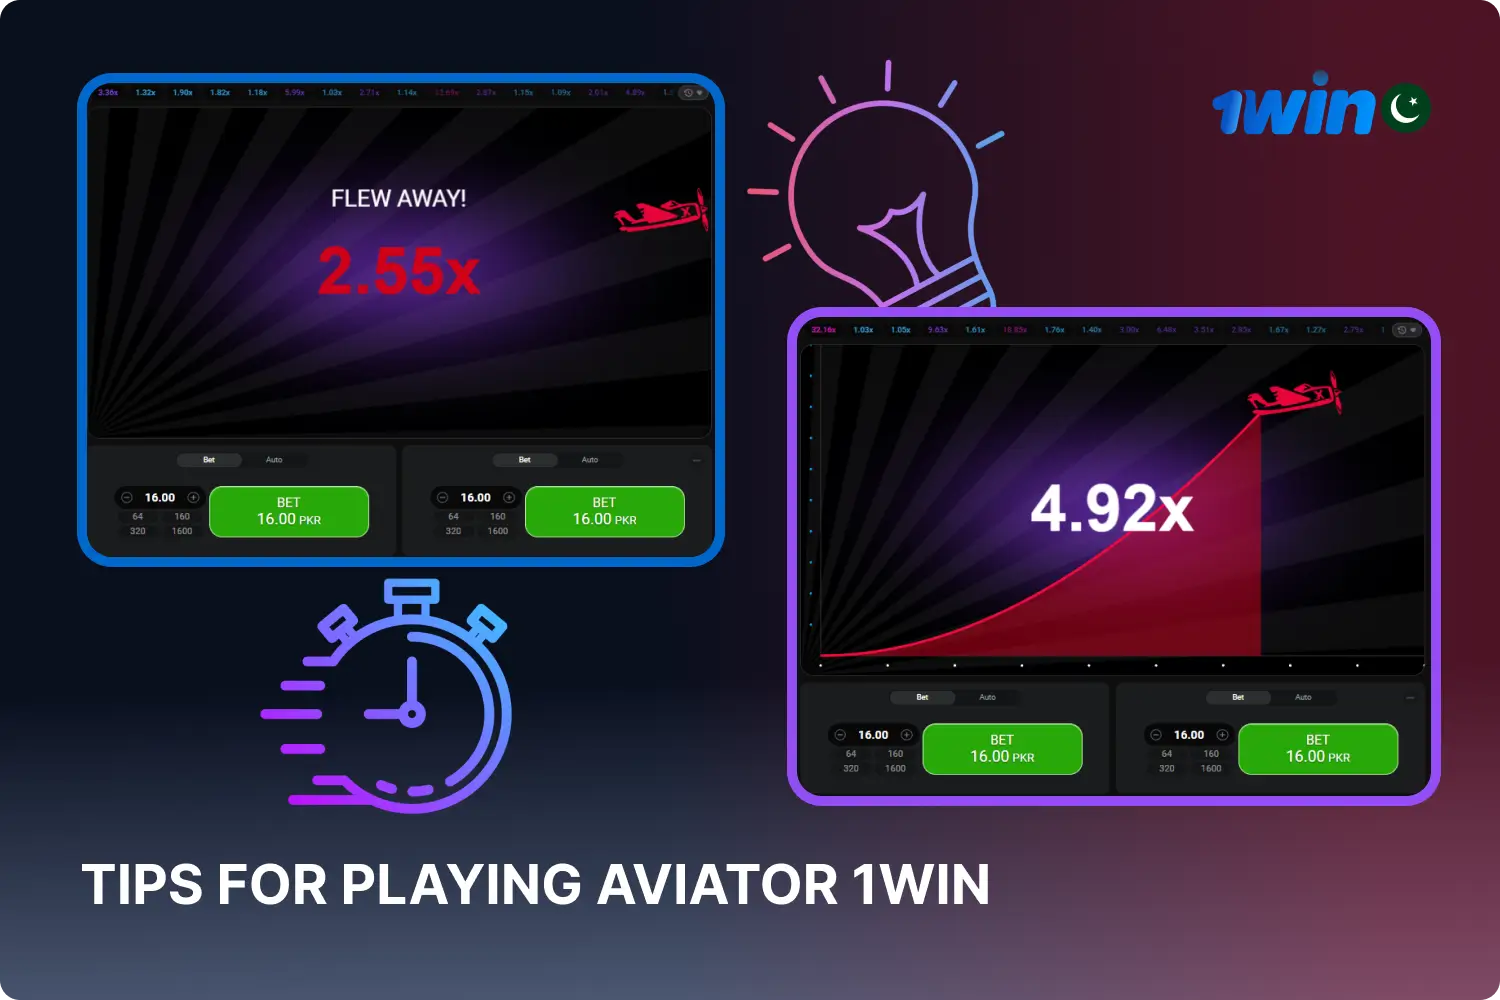 To maximise potential winnings at Aviator 1win, players are advised to consciously manage their budget, set time limits, try popular strategies and control their emotions